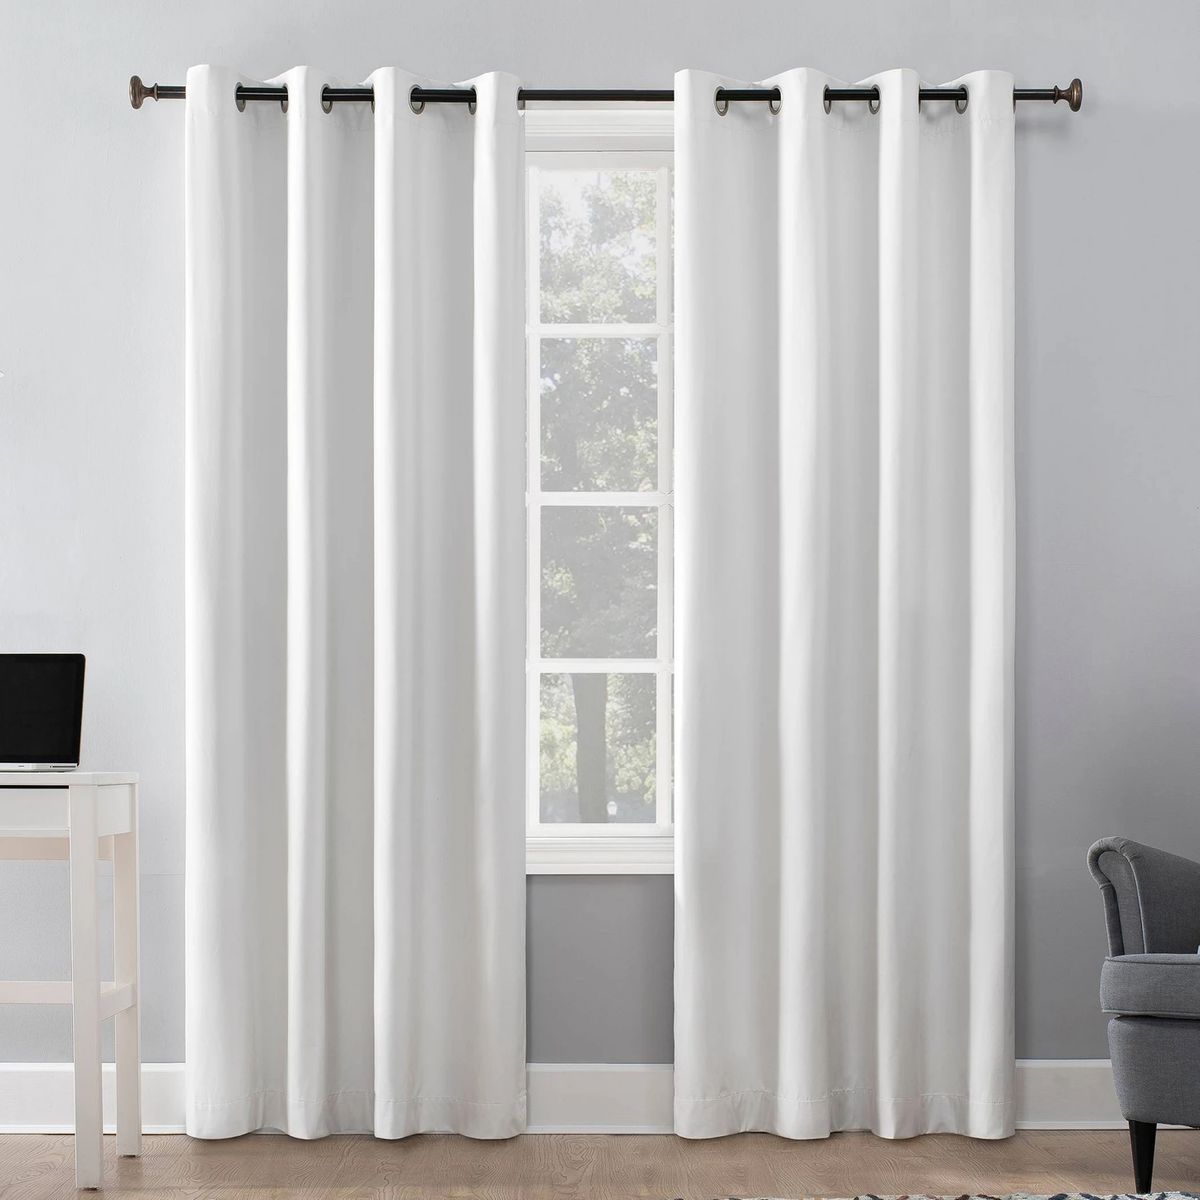 12 Best Curtains For Windows 2020 The Strategist New York Magazine,How To Become A Product Designer